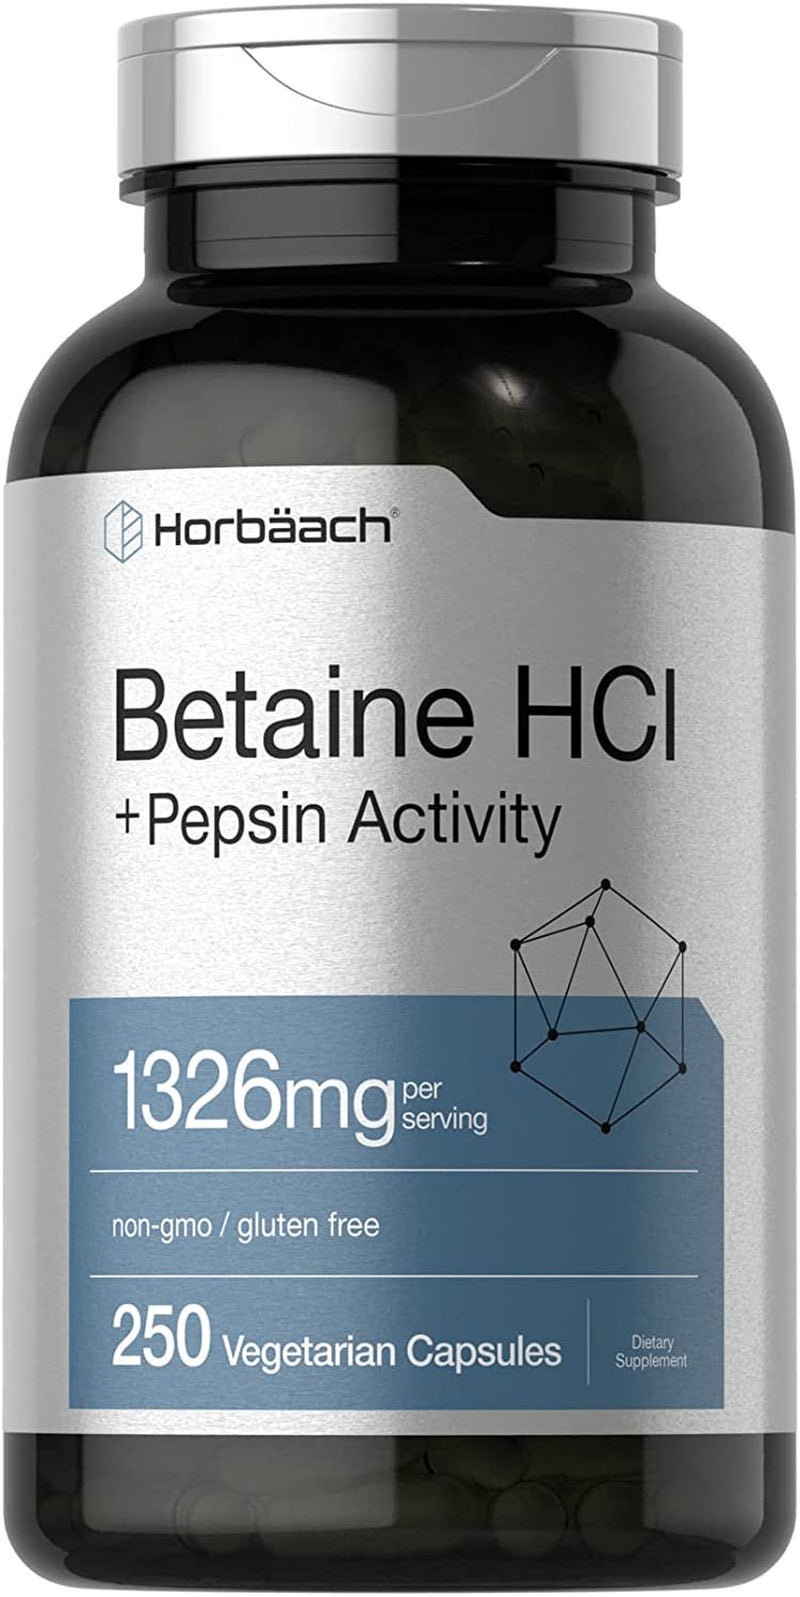 Betaine Hcl with Pepsin | 1326Mg | 250 Vegetarian Capsules | by Horbaach